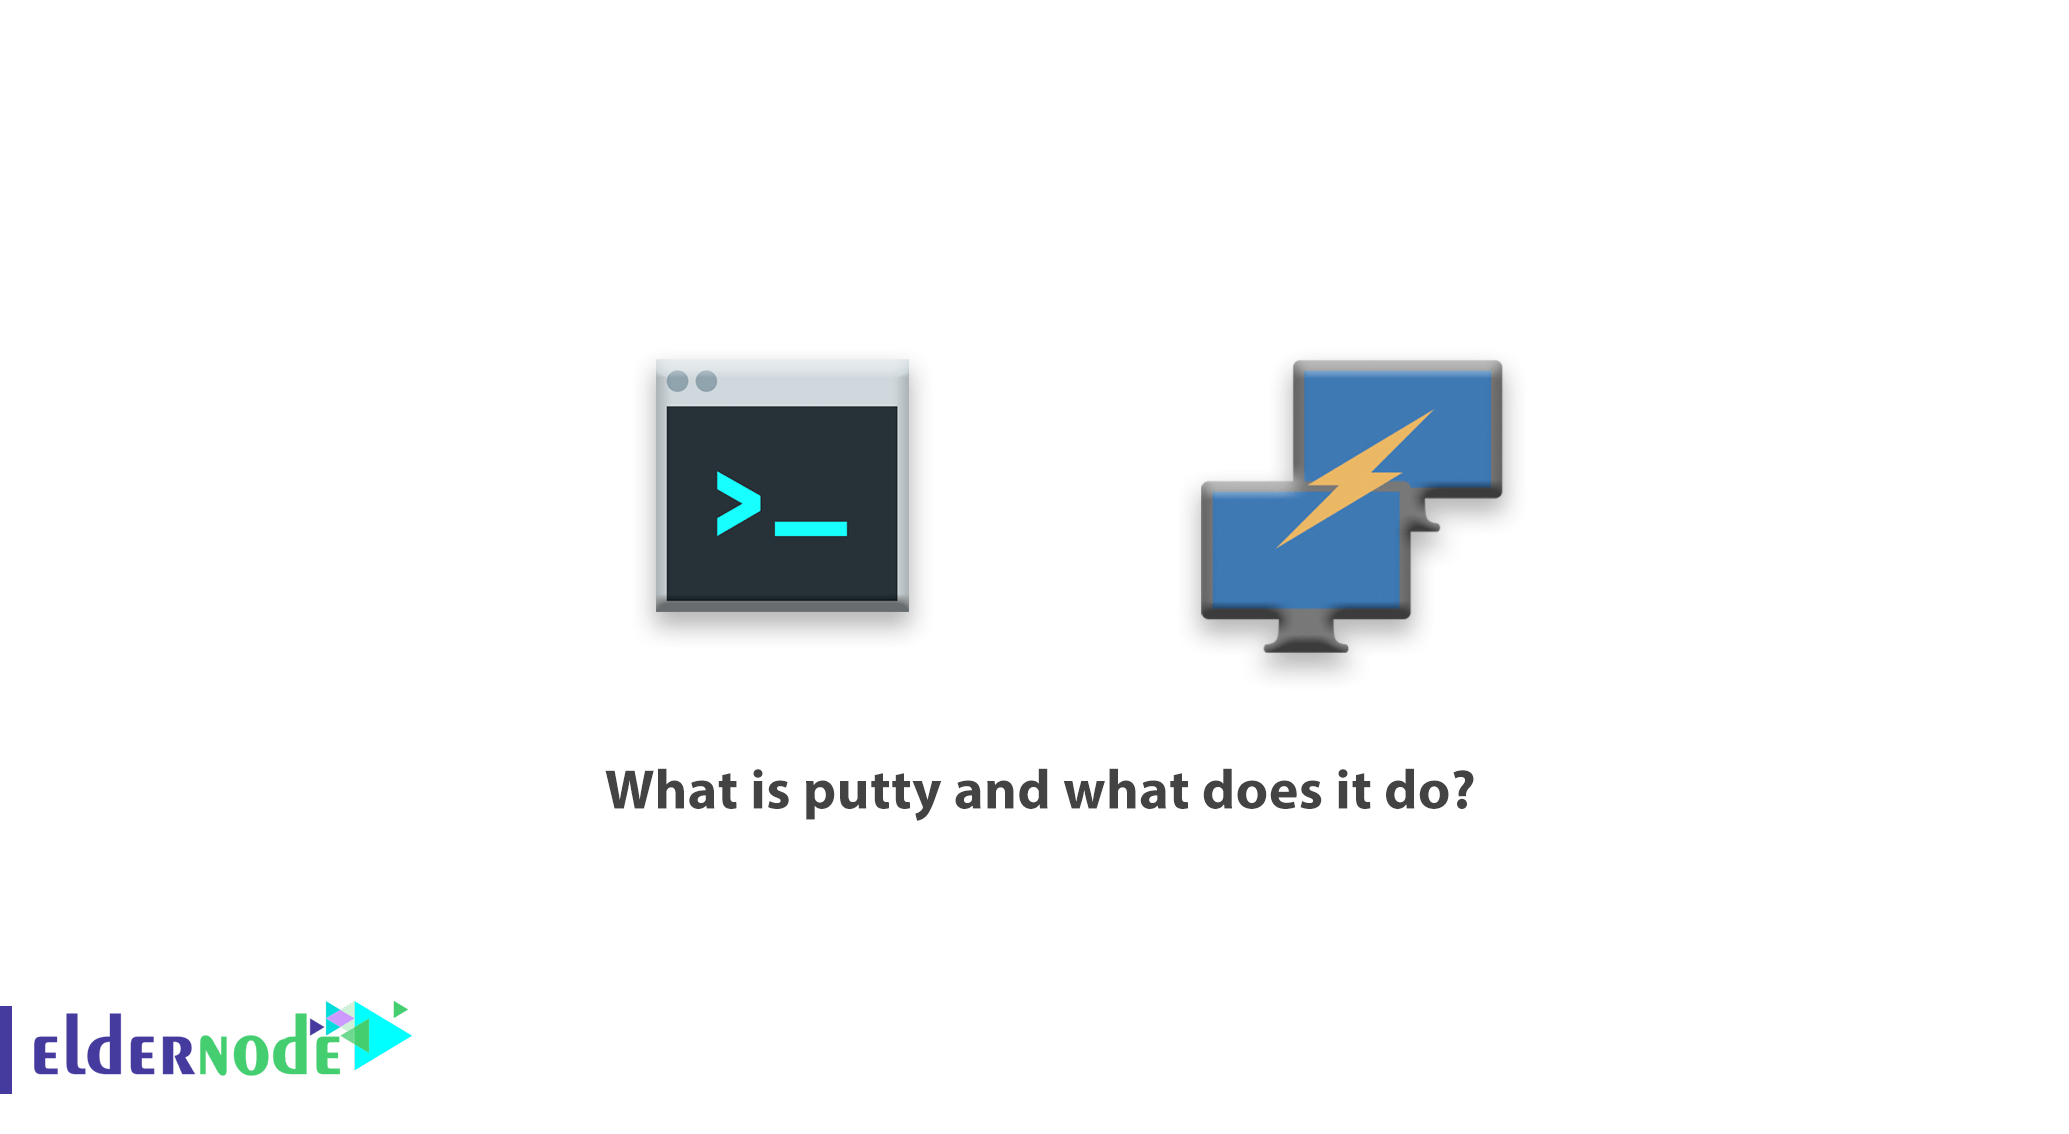 What is putty and what does it do